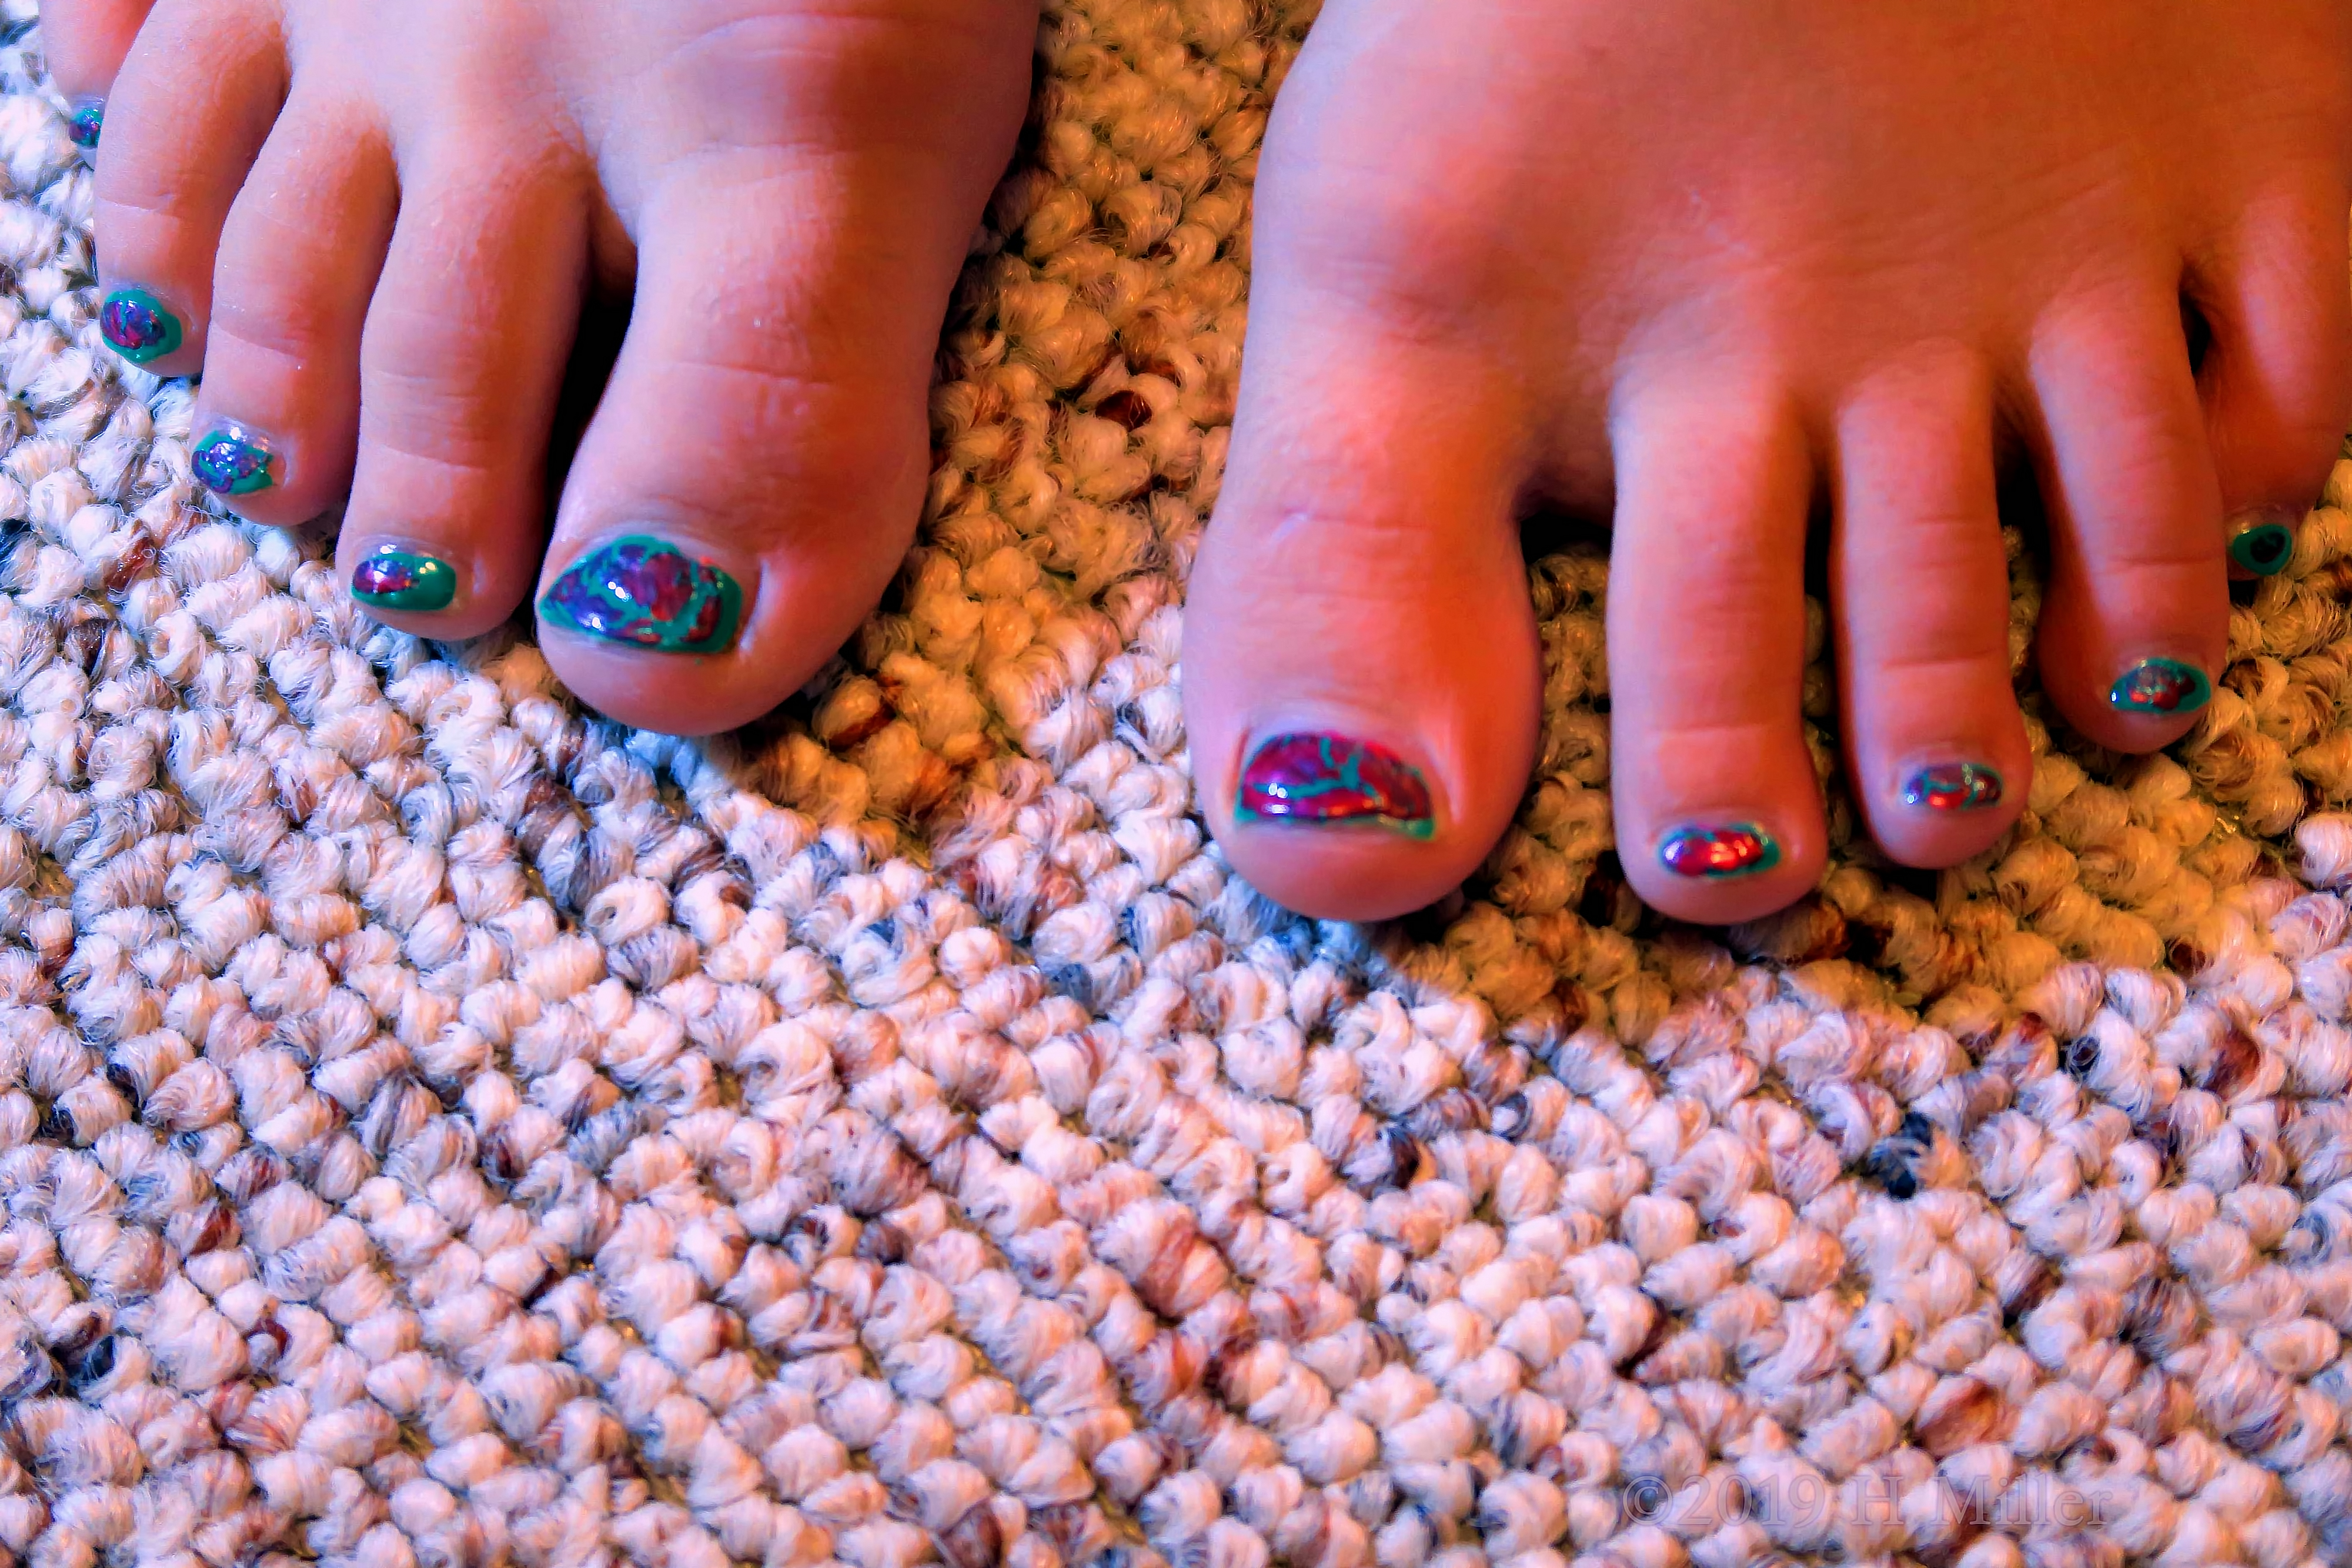 A Kaleidoscope Of Colors For This Girls Pedicure 